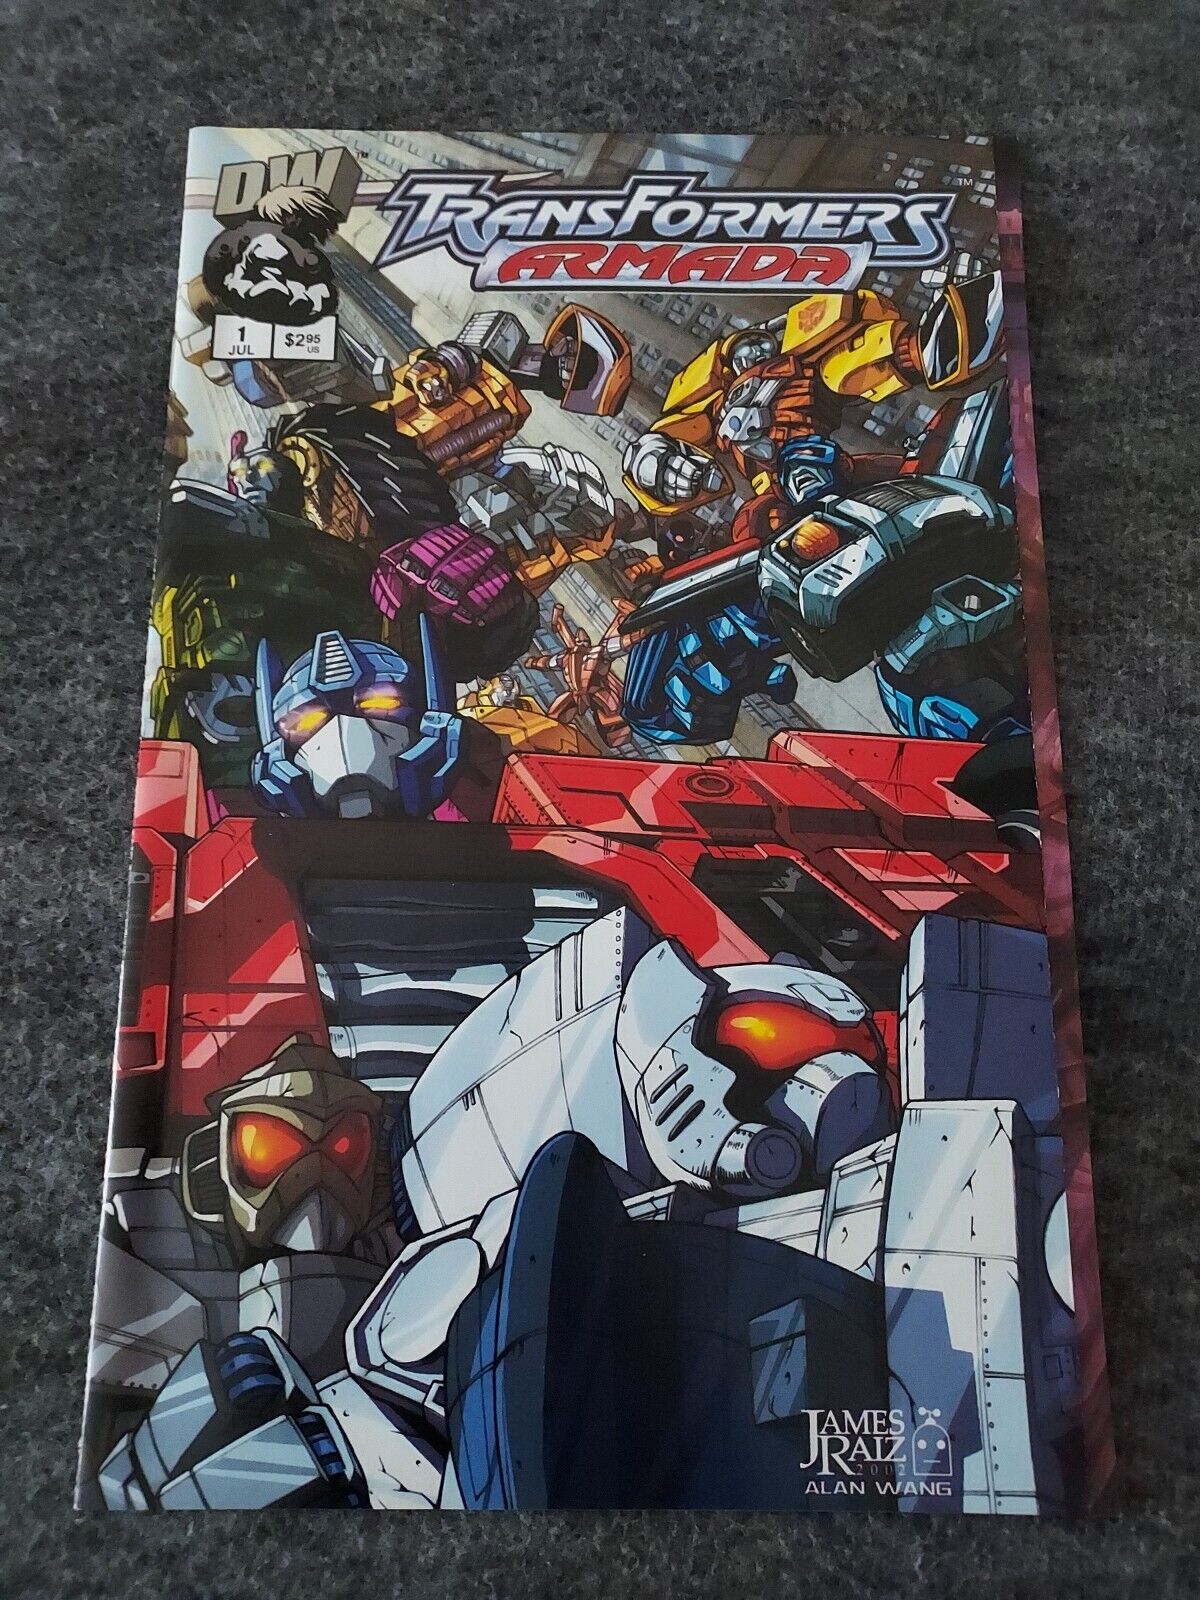 Transformers Armada Issue 1, Volume 1 July 2002 (DW -DreamWave Productions).